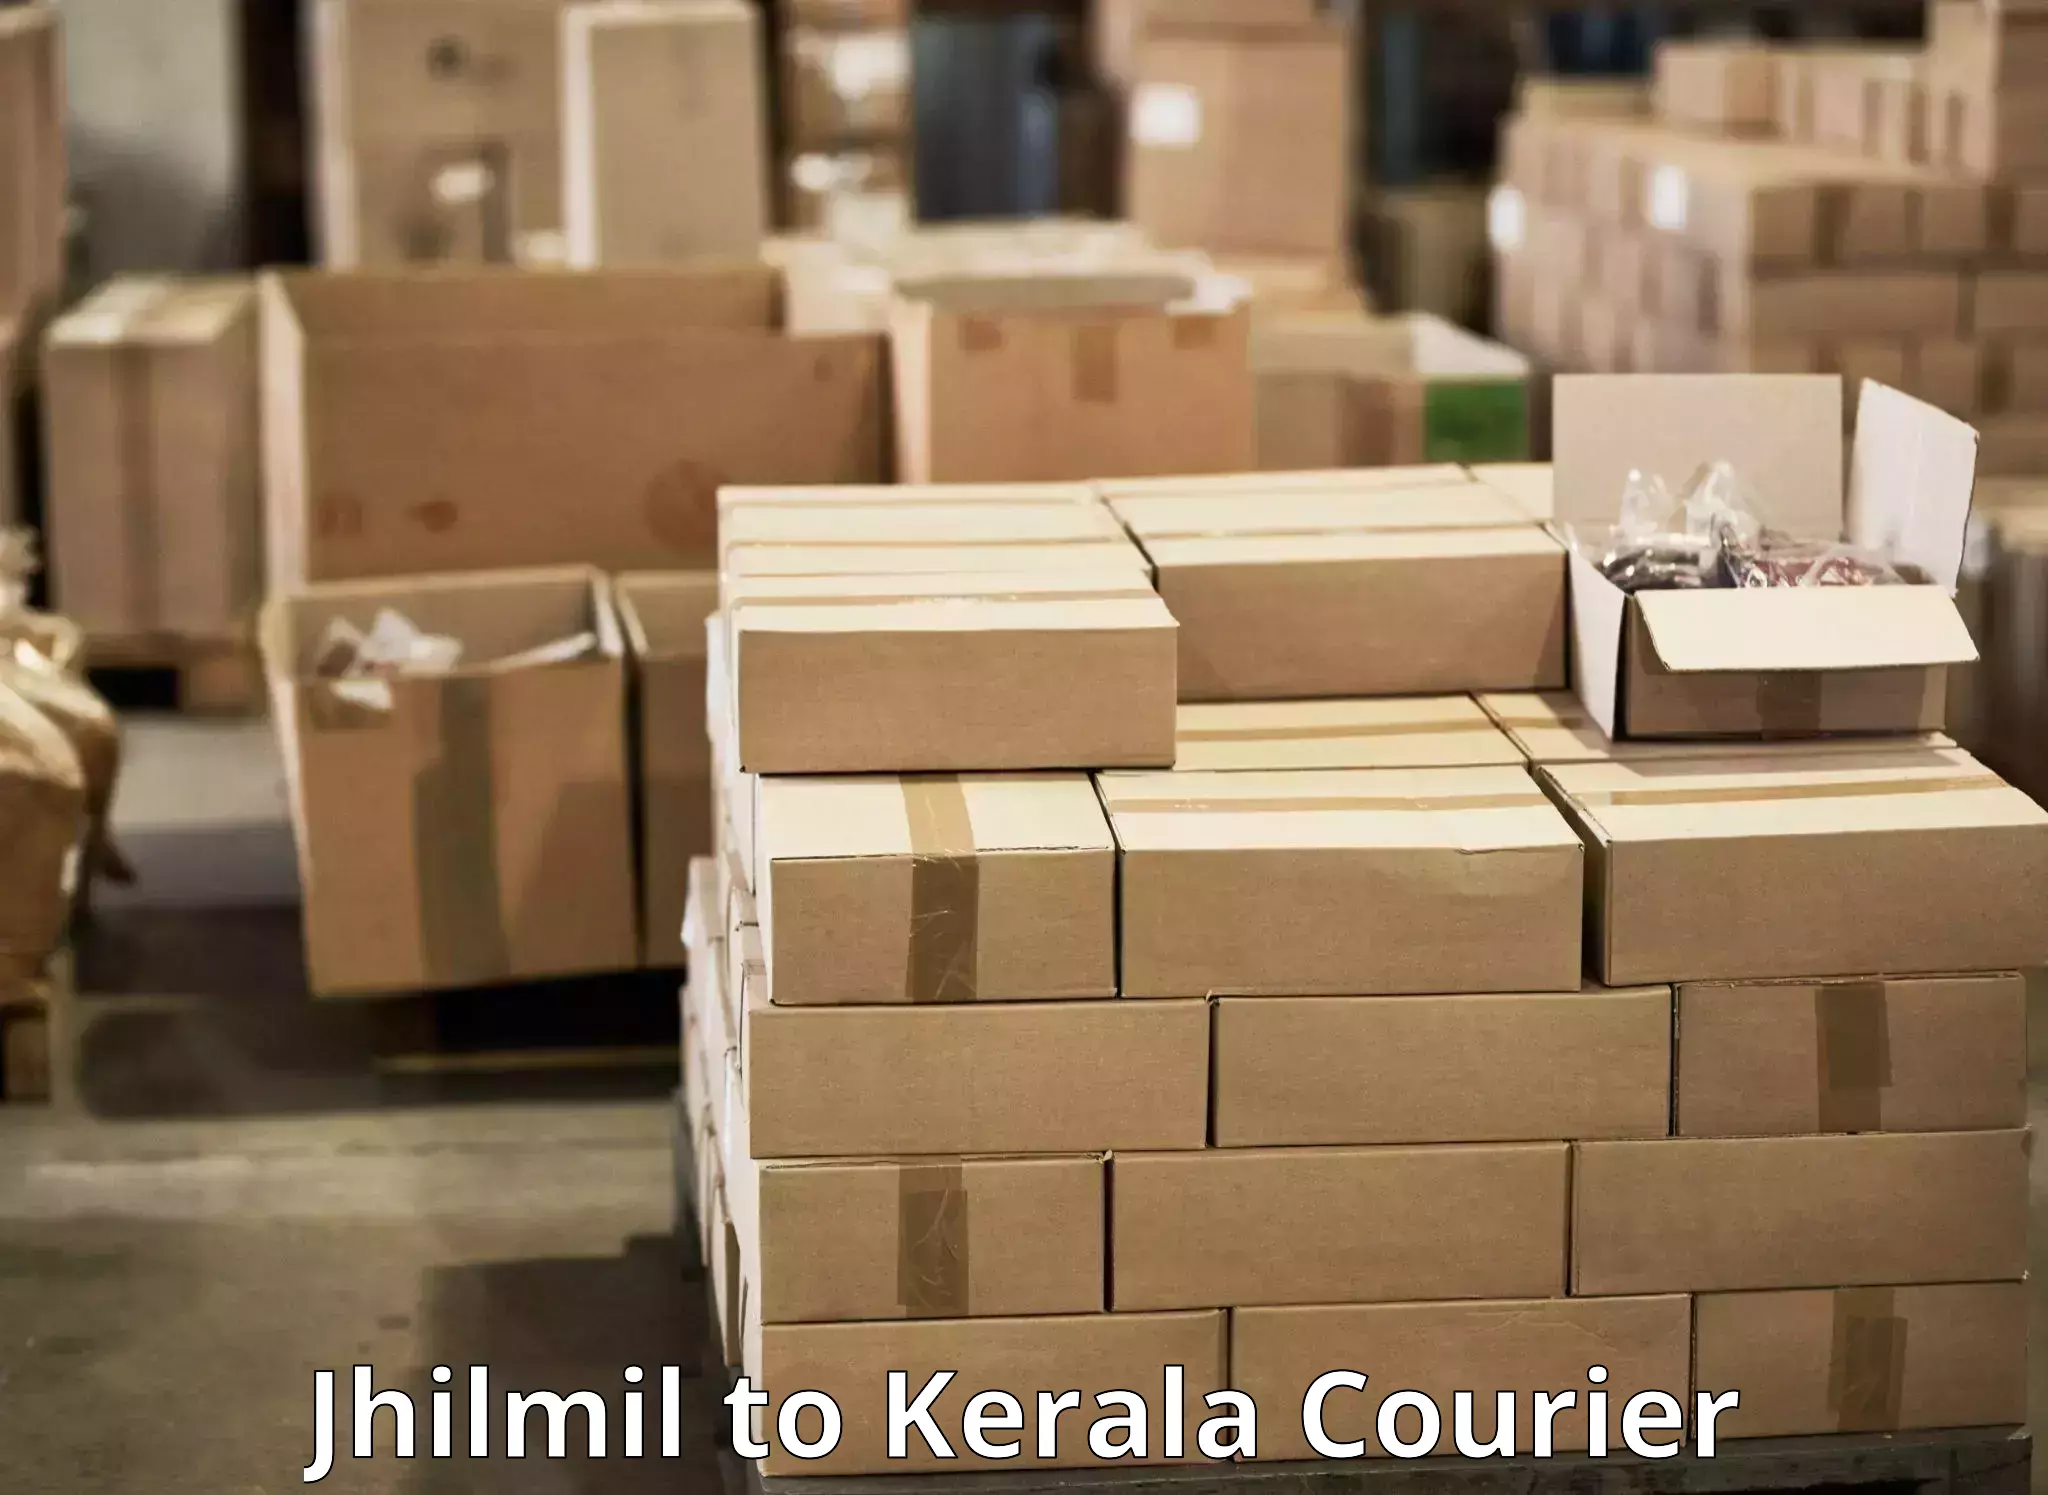 24/7 courier service Jhilmil to Kuchi